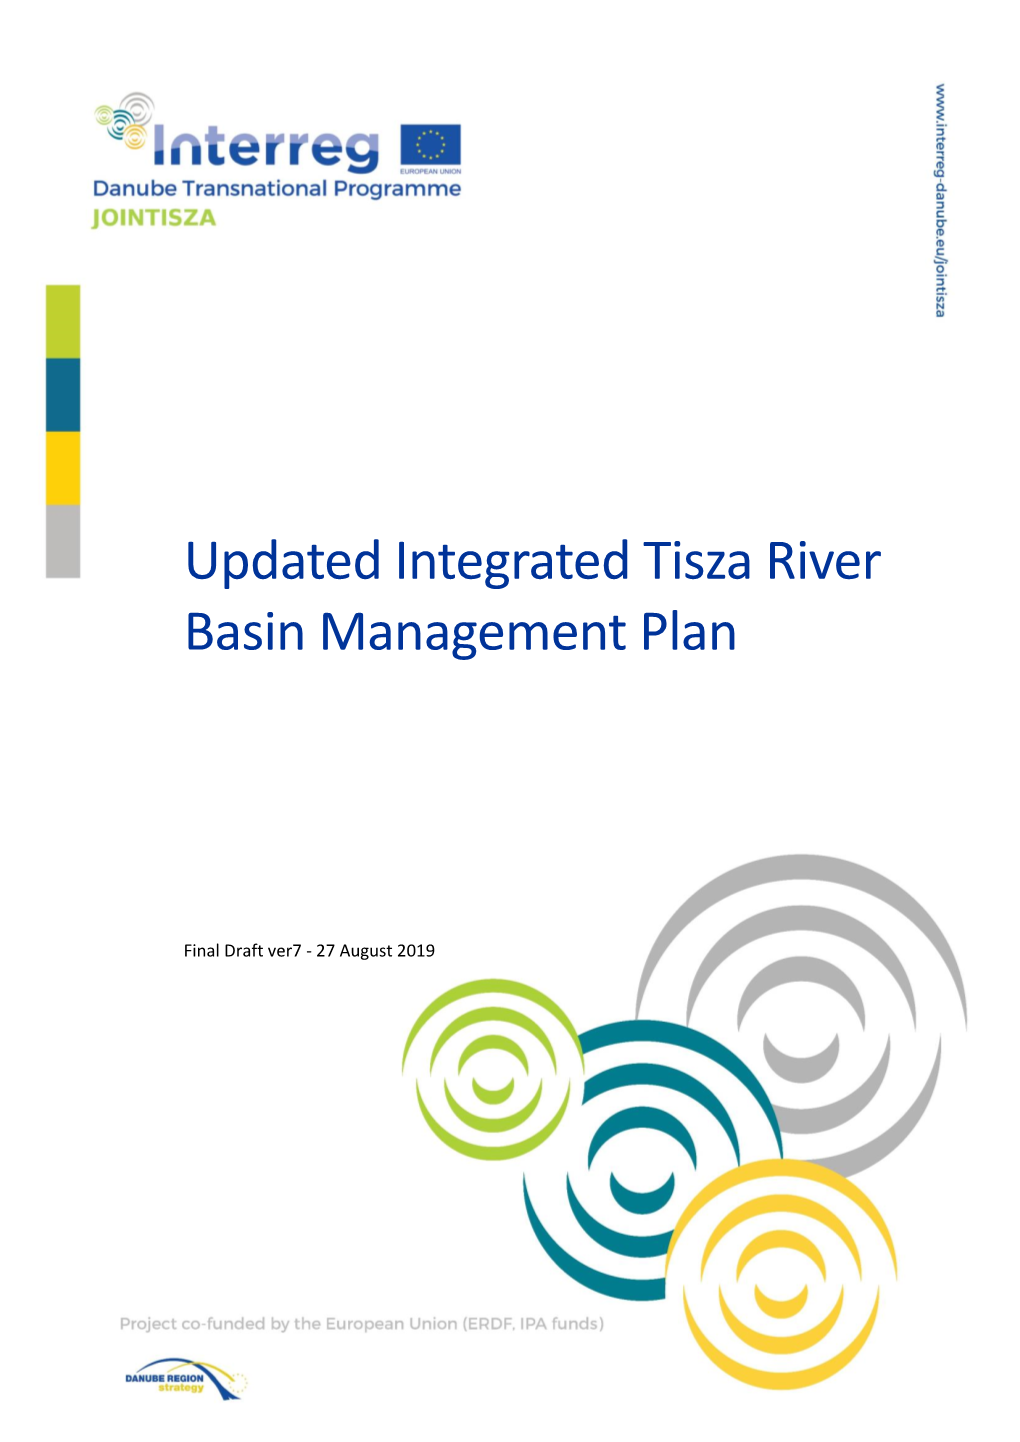 Updated Integrated Tisza River Basin Management Plan